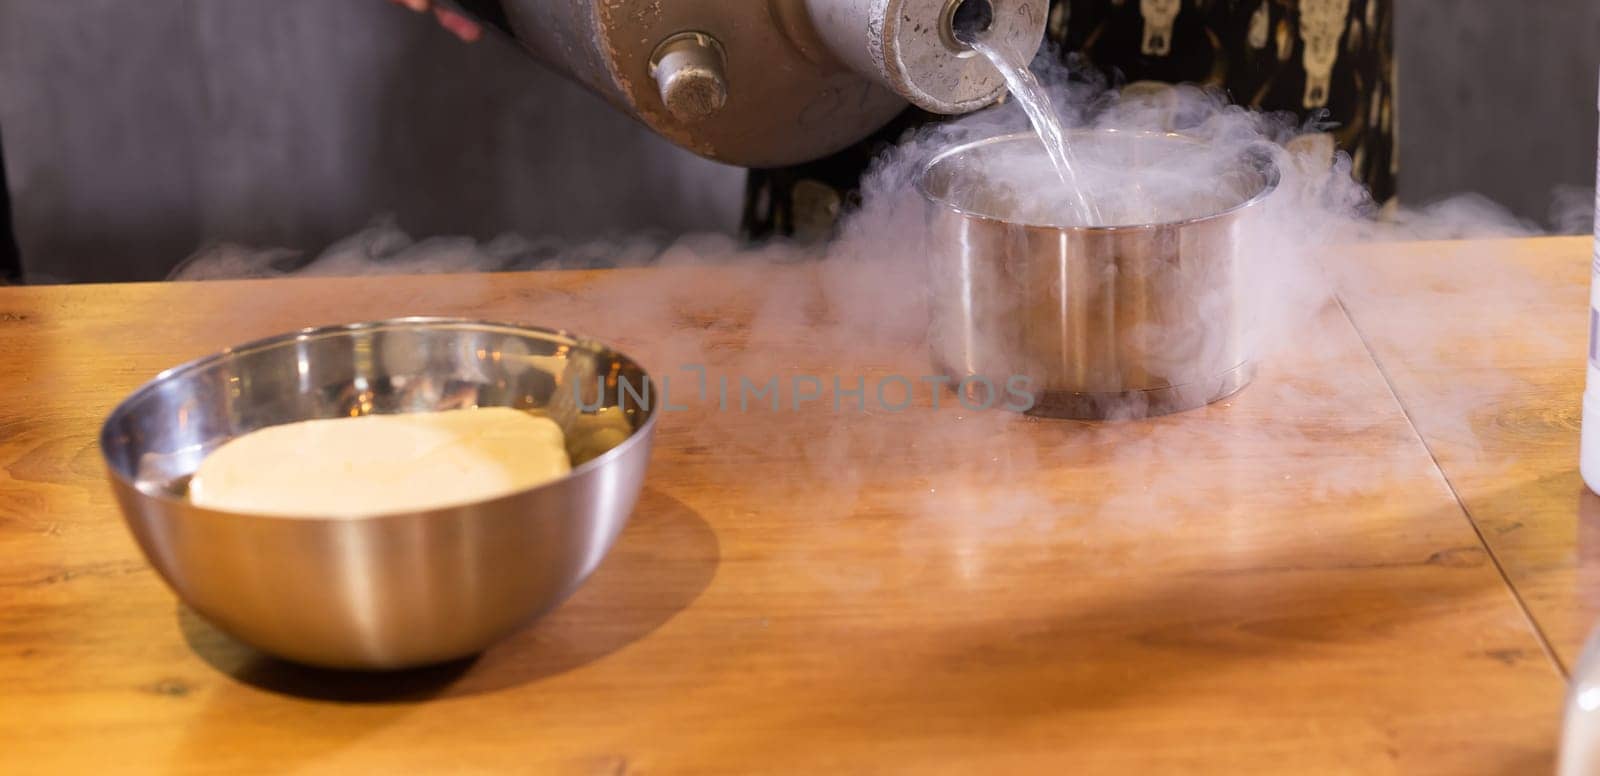 Smoke vapor dry ice in bowl in kitchen copy space and empty space for text by Satura86